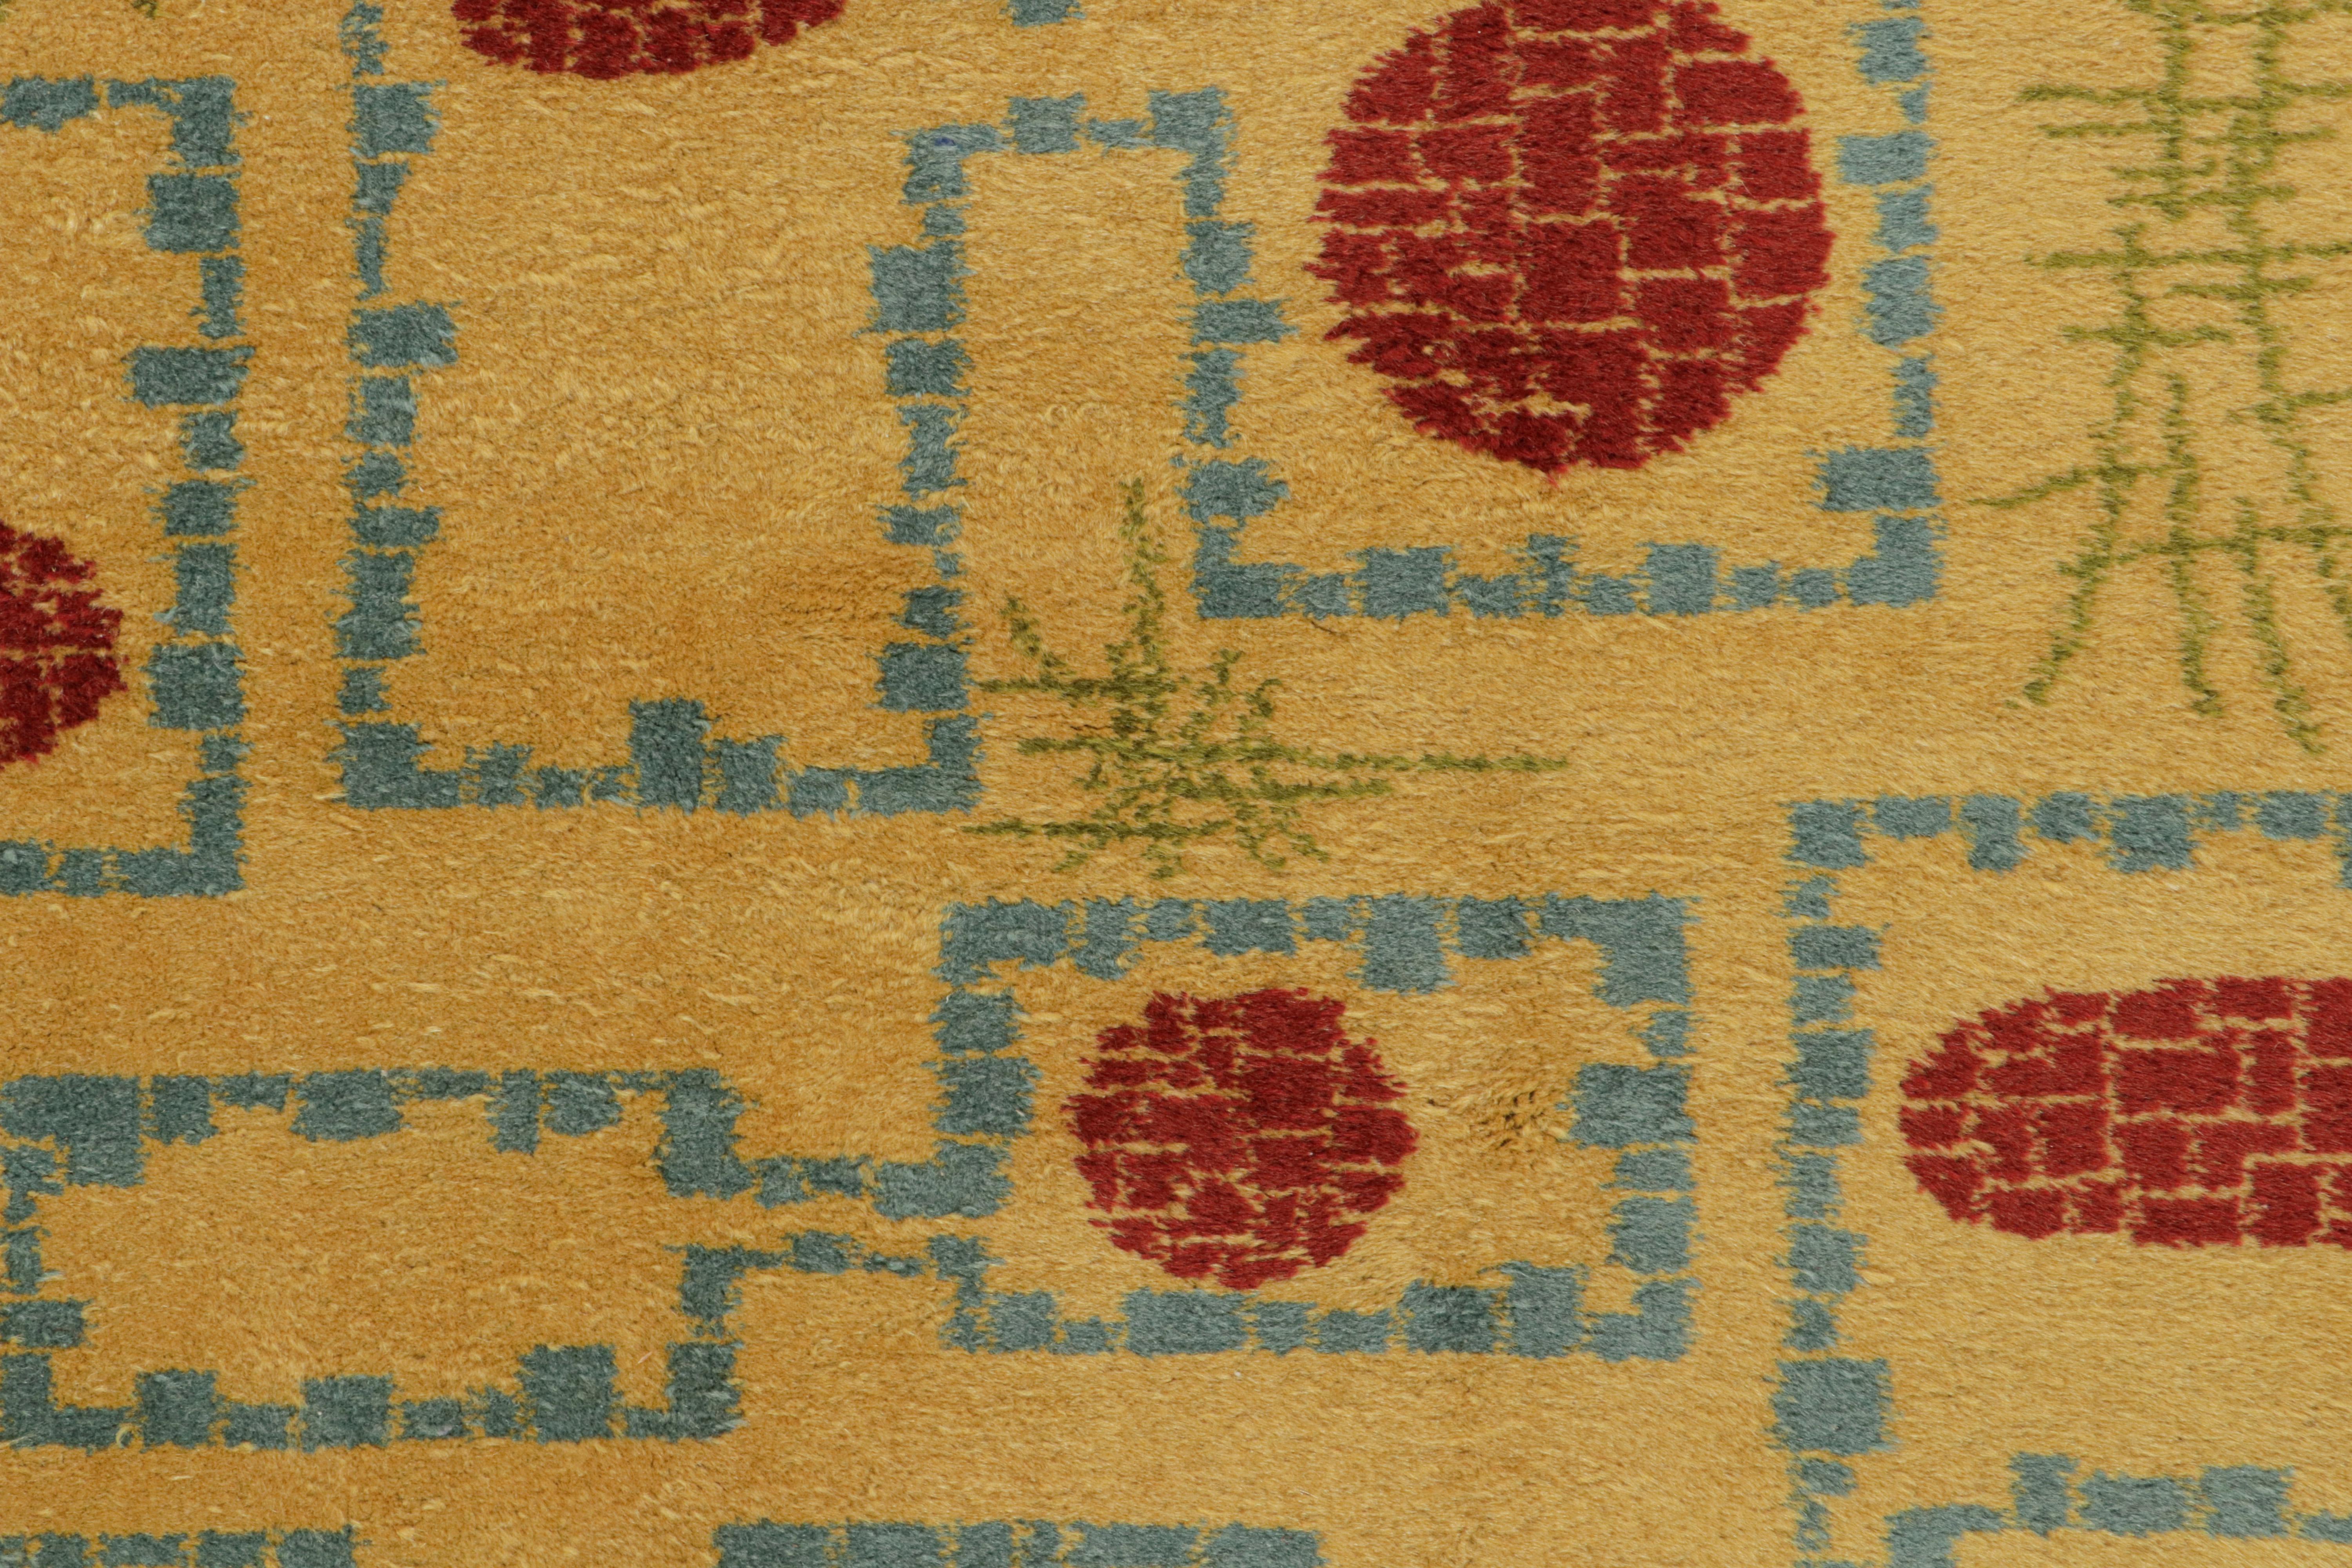 Vintage Zeki Müren Rug in Ochre with Red & Blue Geometric Pattern by Rug & Kilim In Good Condition For Sale In Long Island City, NY